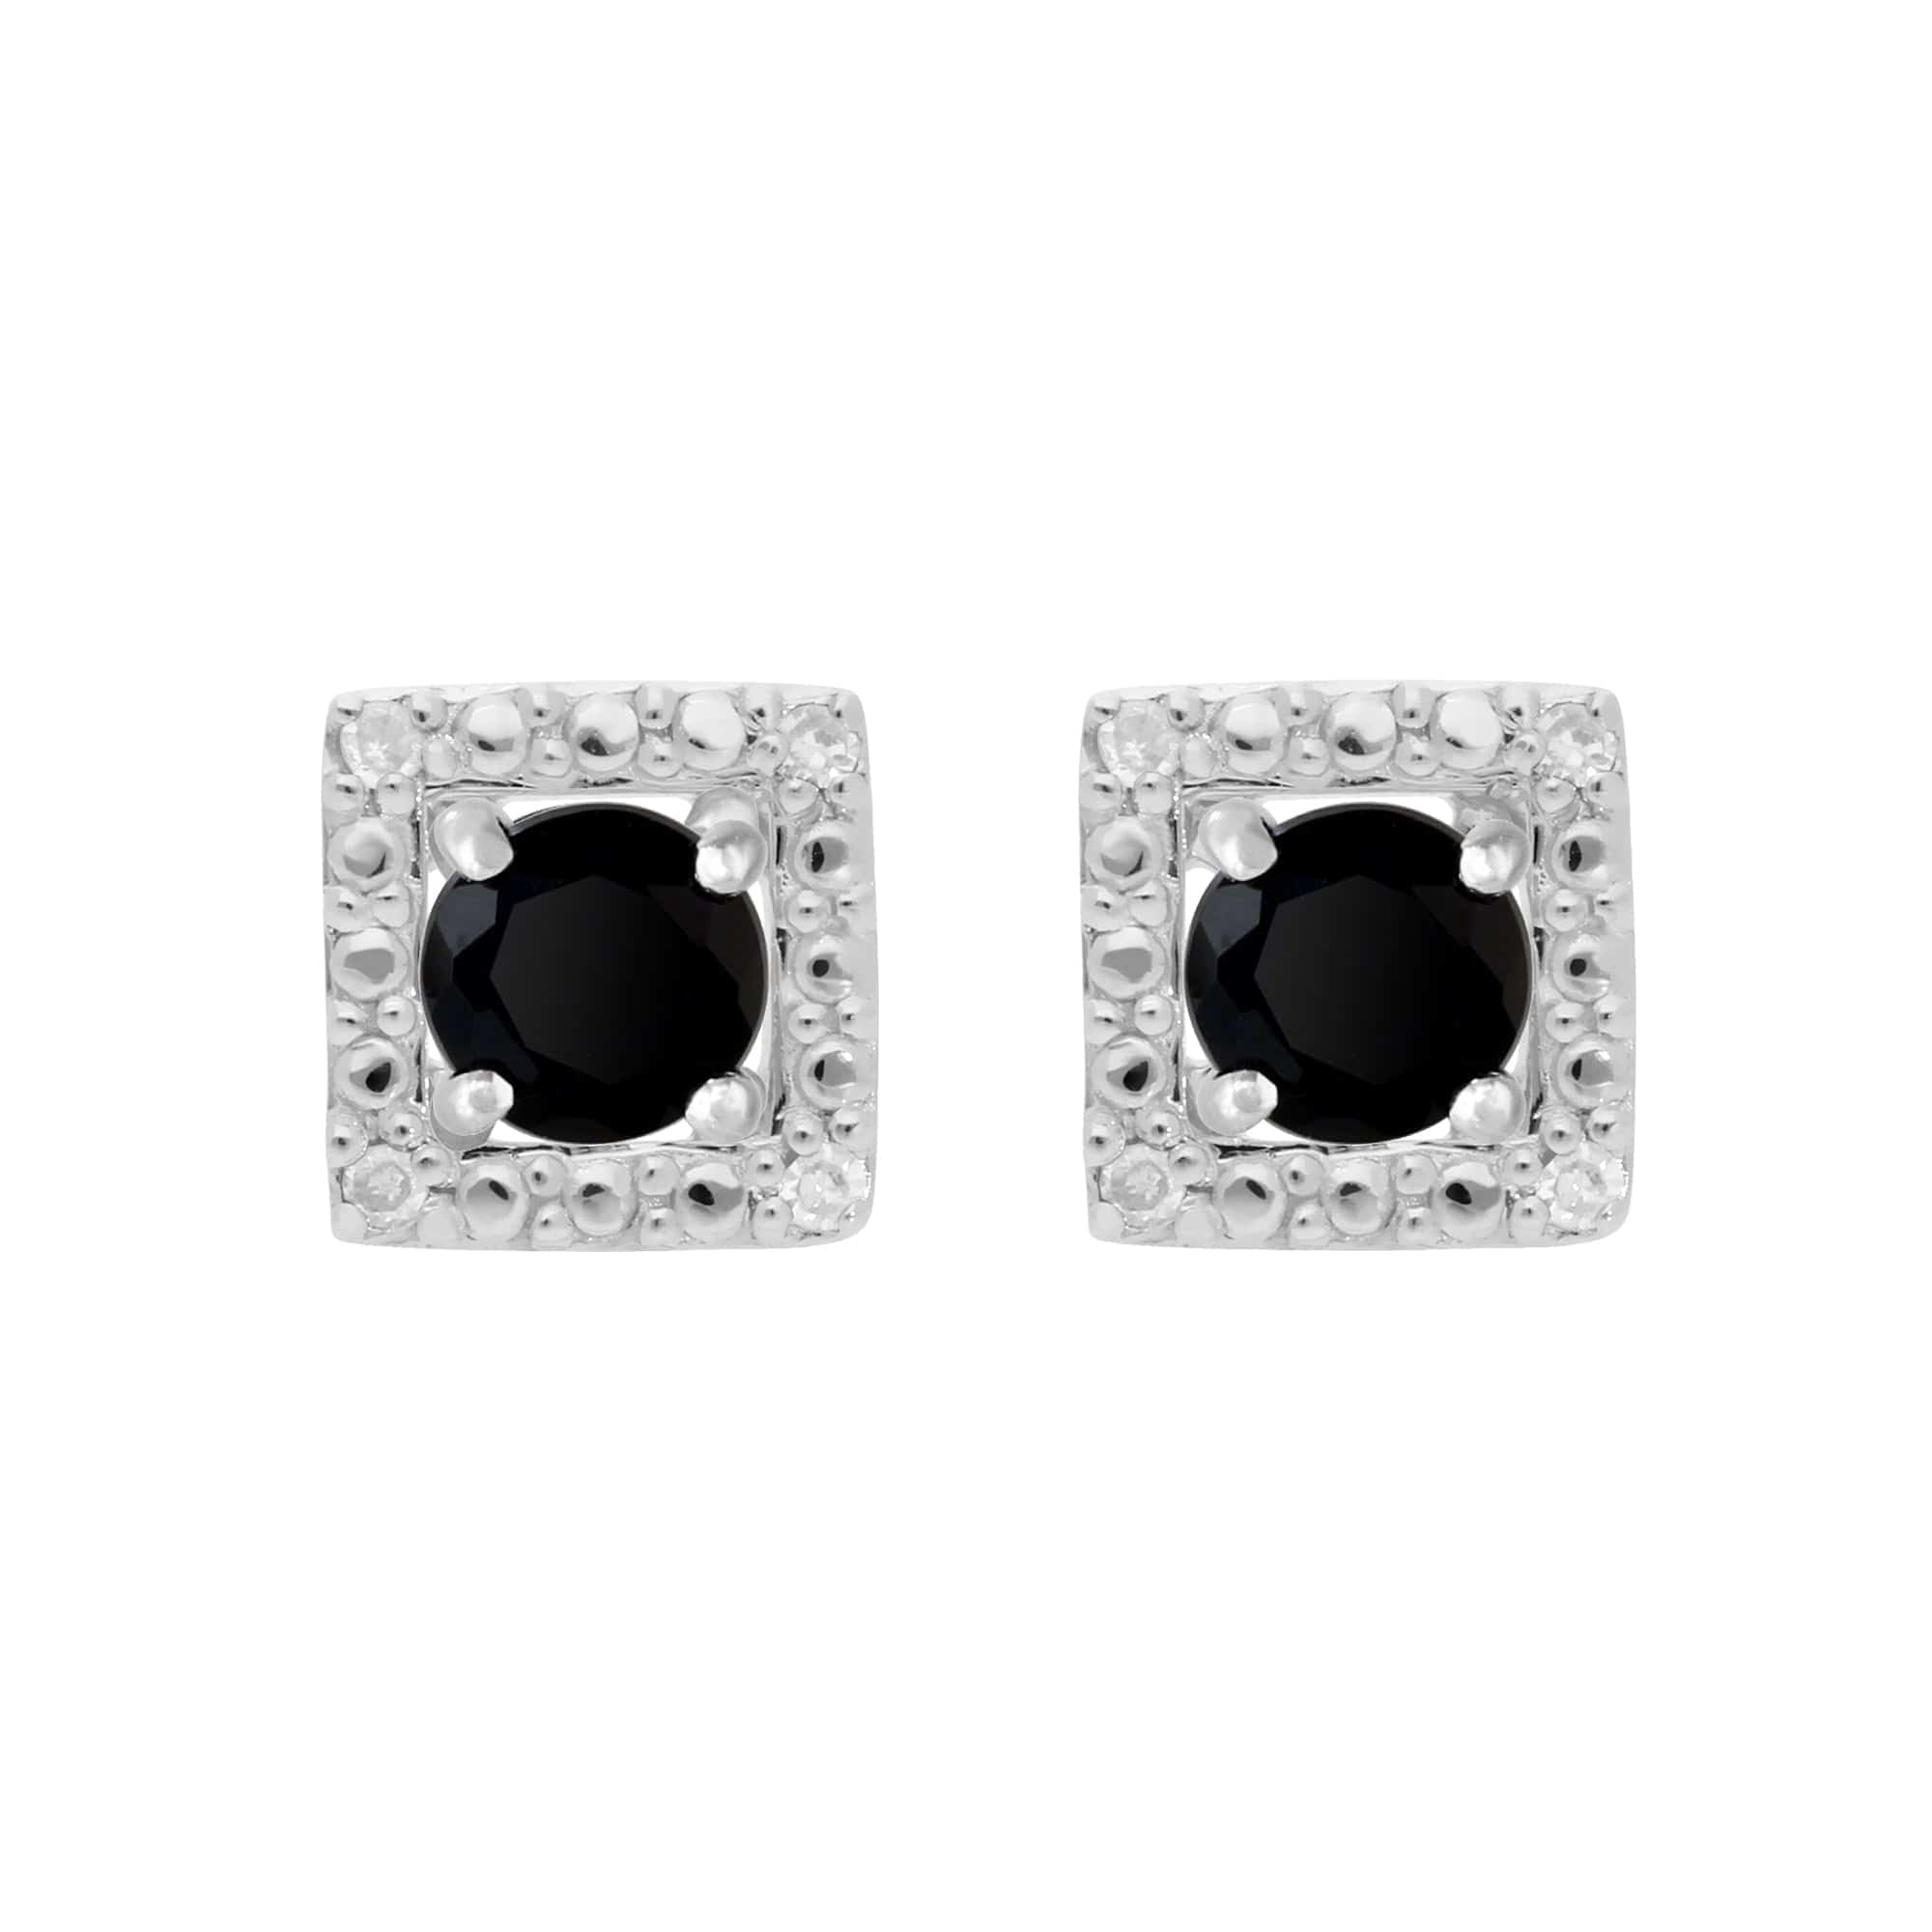 117E0031119-162E0245019 Classic Round Black Onyx Stud Earrings with Detachable Diamond Square Ear Jacket in 9ct White Gold 1